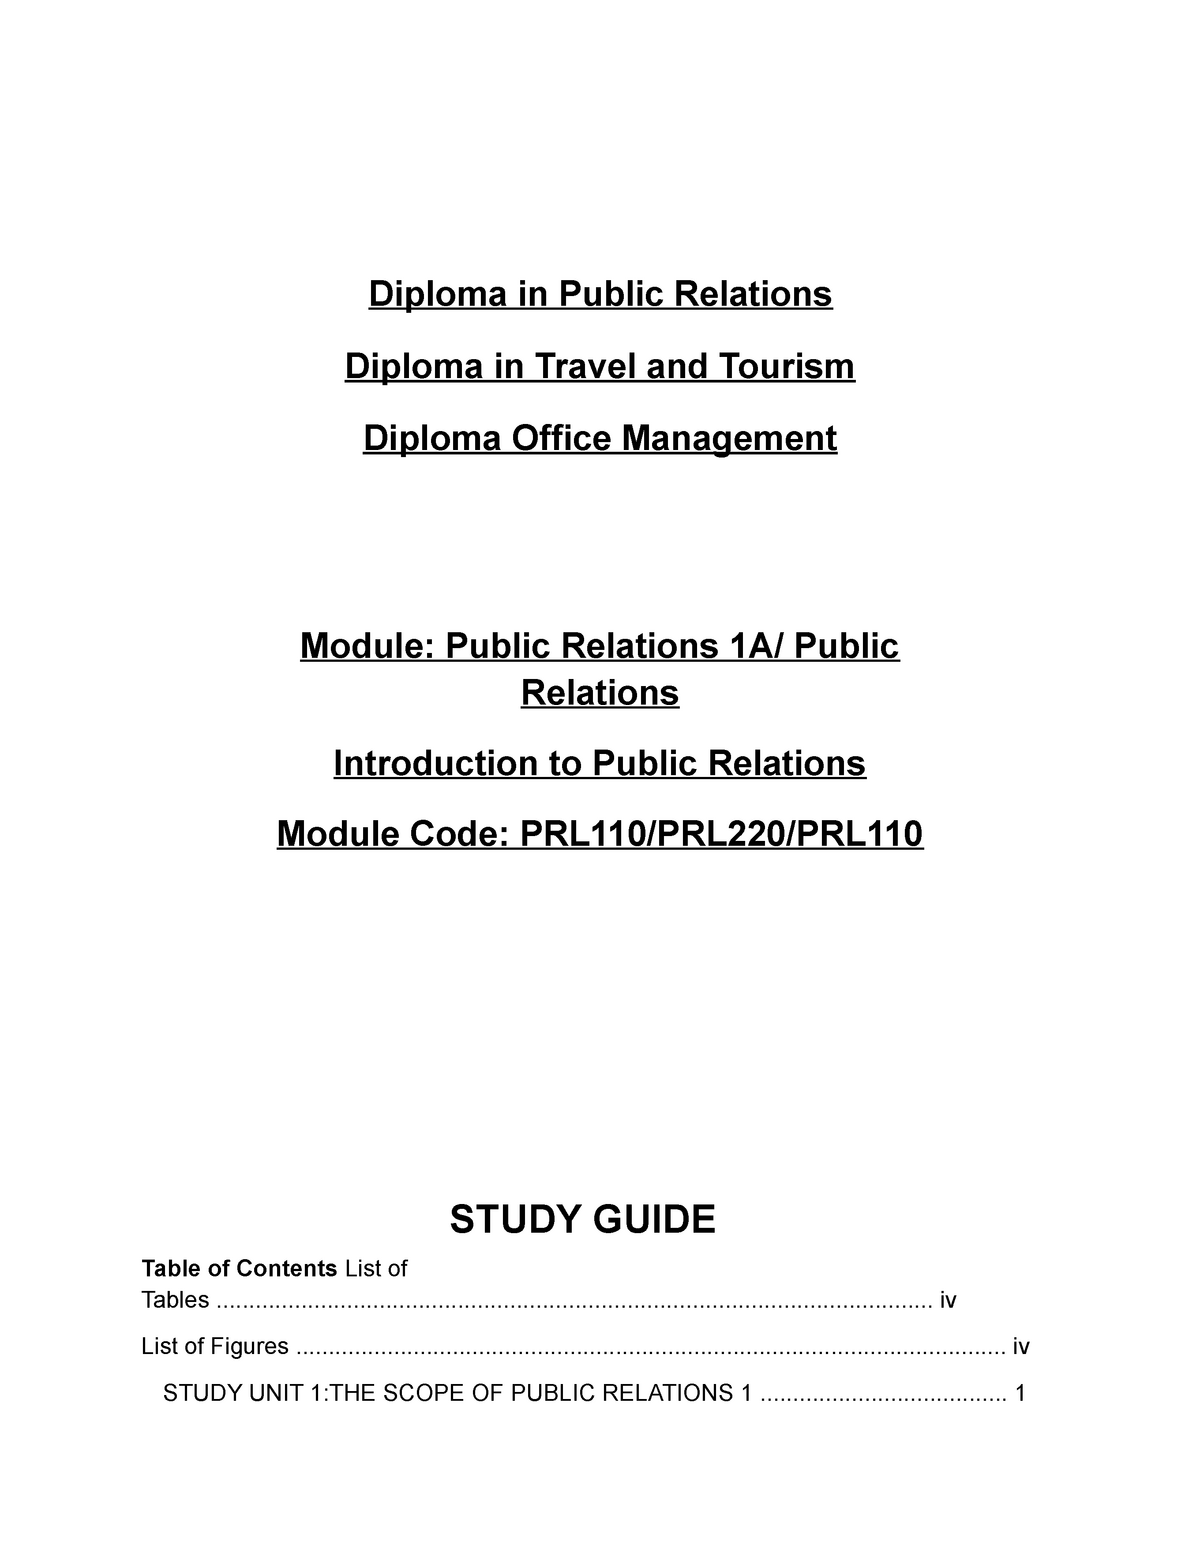 phd thesis on public relations